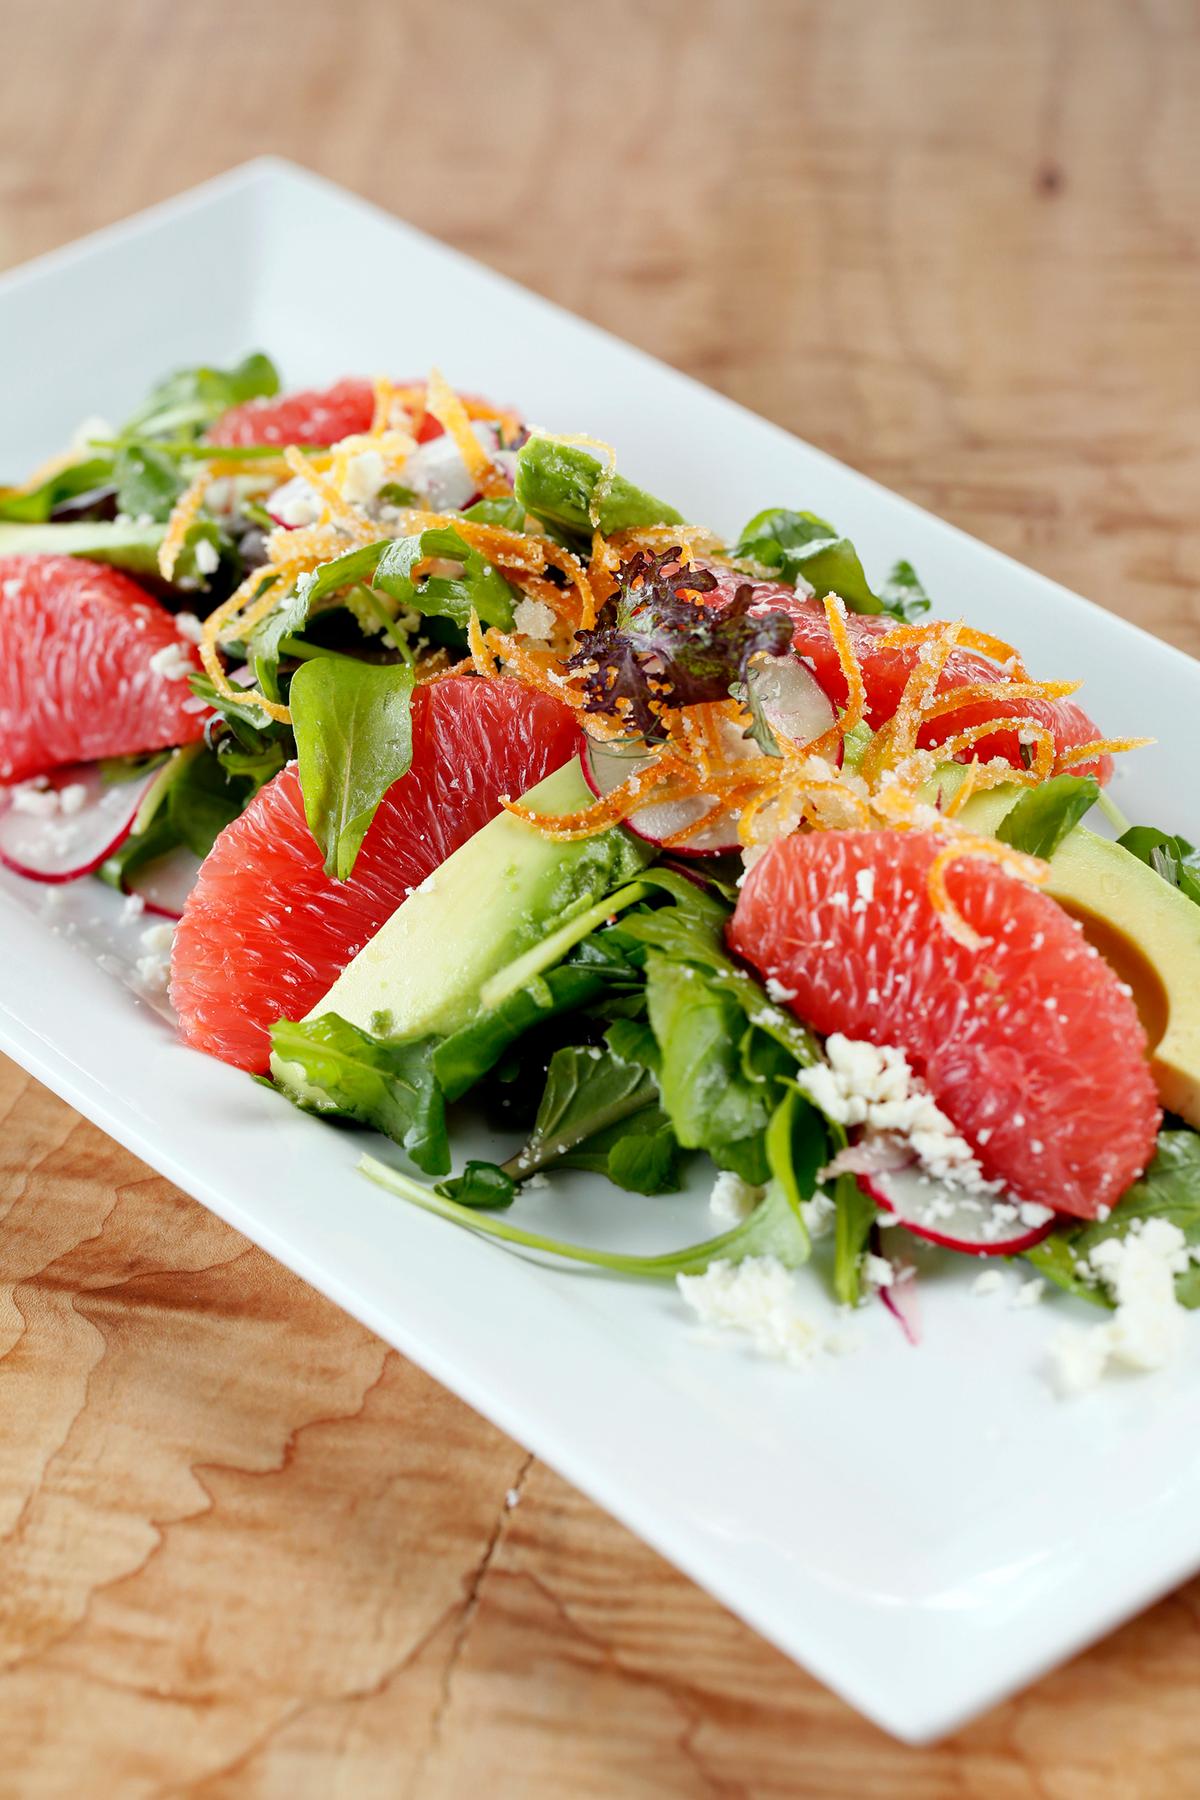 Ruby grapefruit salad with Asian lettuces and candied grapefruit zest at Tinker Street. (Courtesy of Tinker Street)